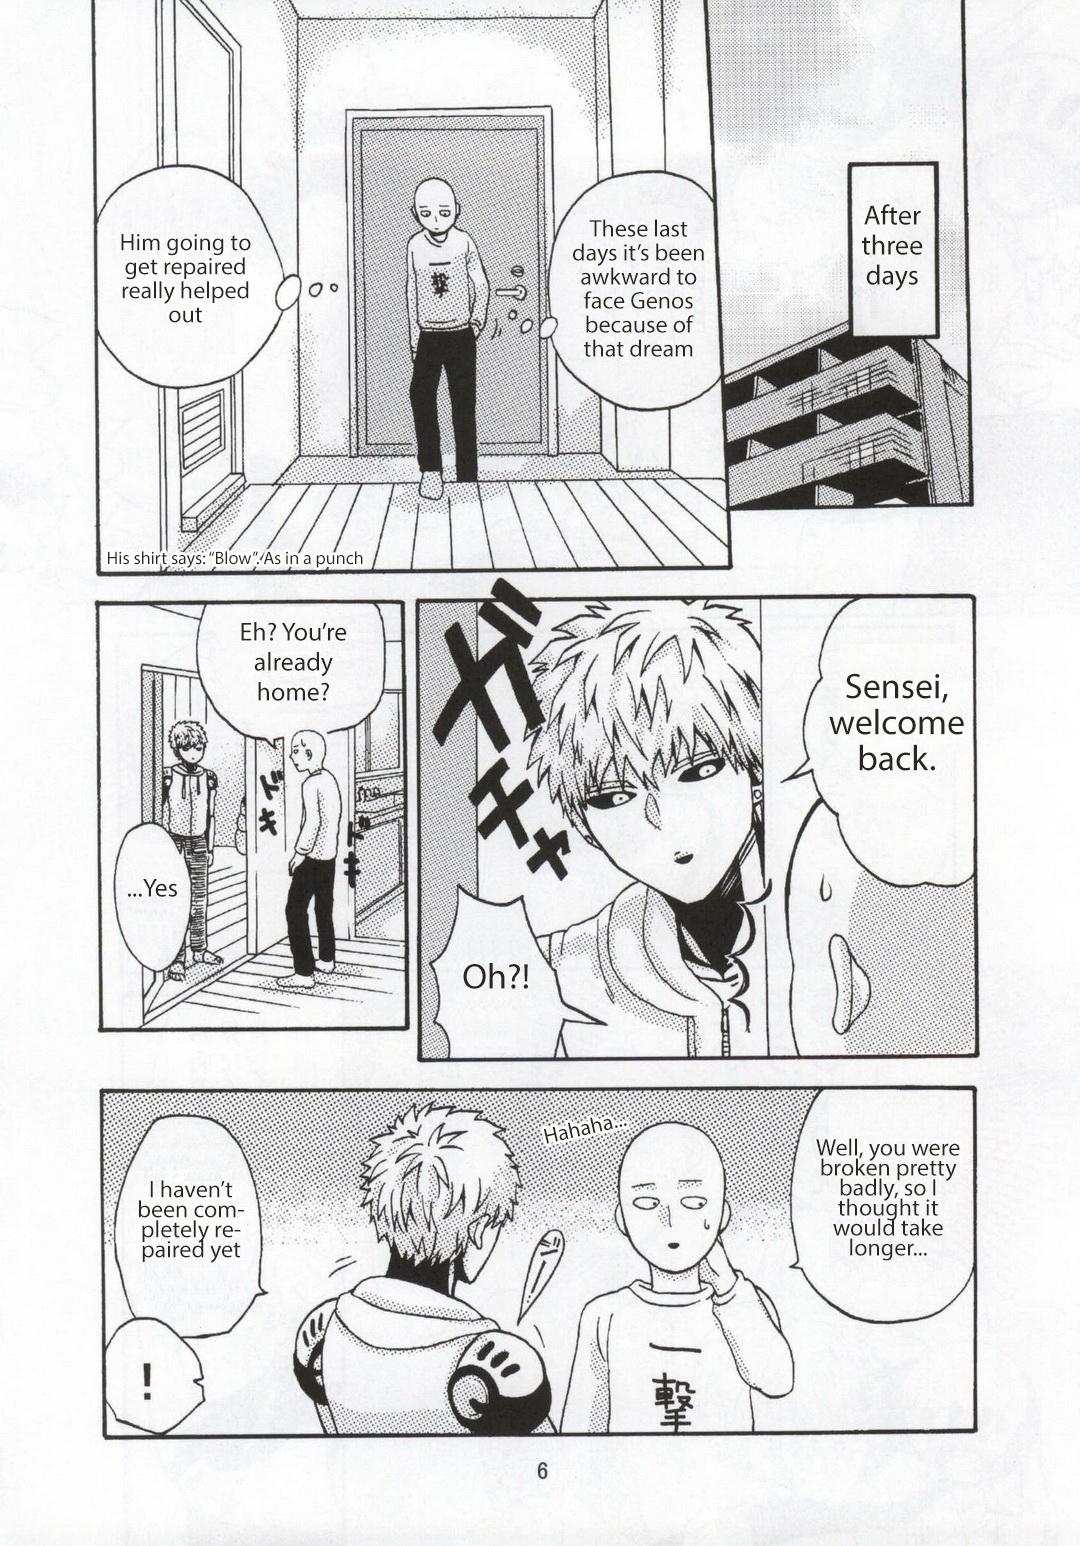 Puto NATURAL JUNKIE - One punch man Porno - Page 6